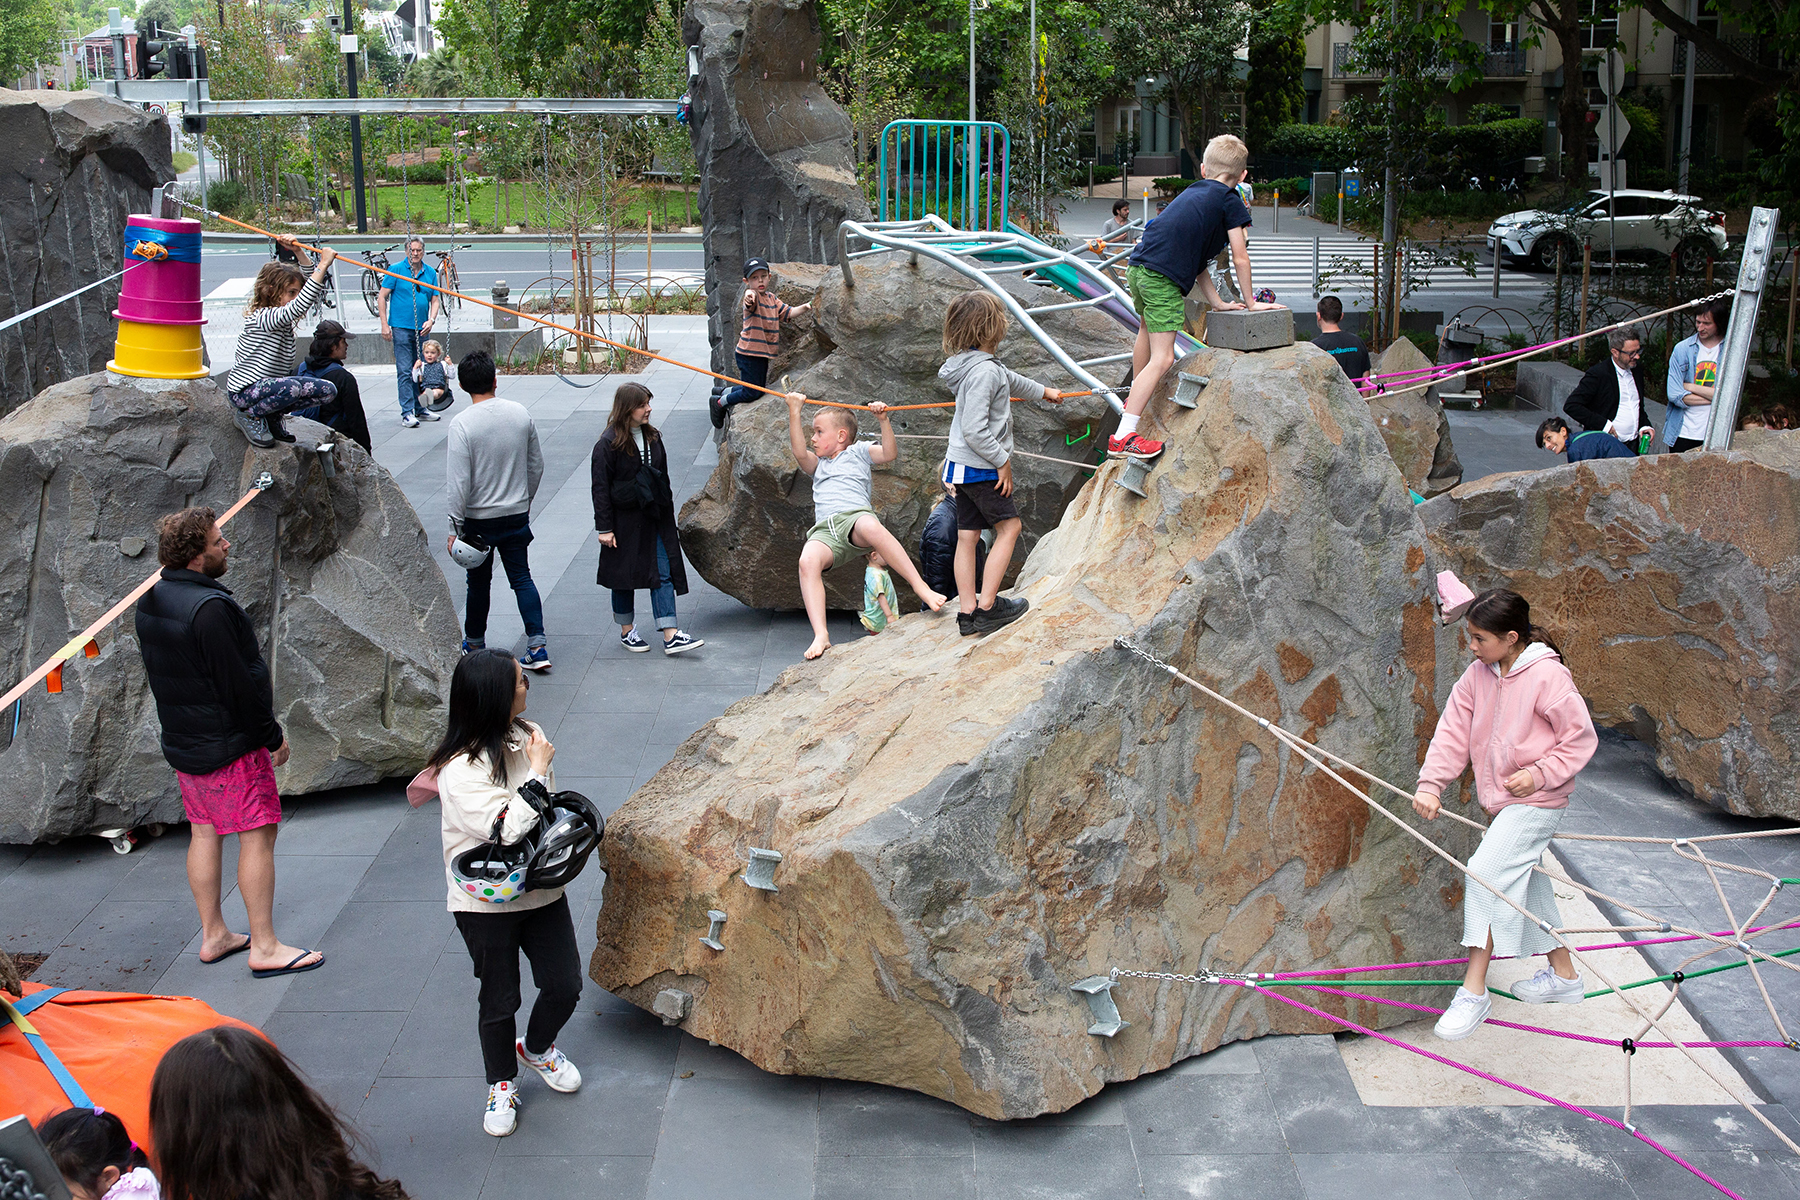 The playground’s whimsical elements have been carefully designed and constructed to ensure safety while enhancing the perception of risk-taking among young parkgoers. (Image courtesy of Andrew Hewson)